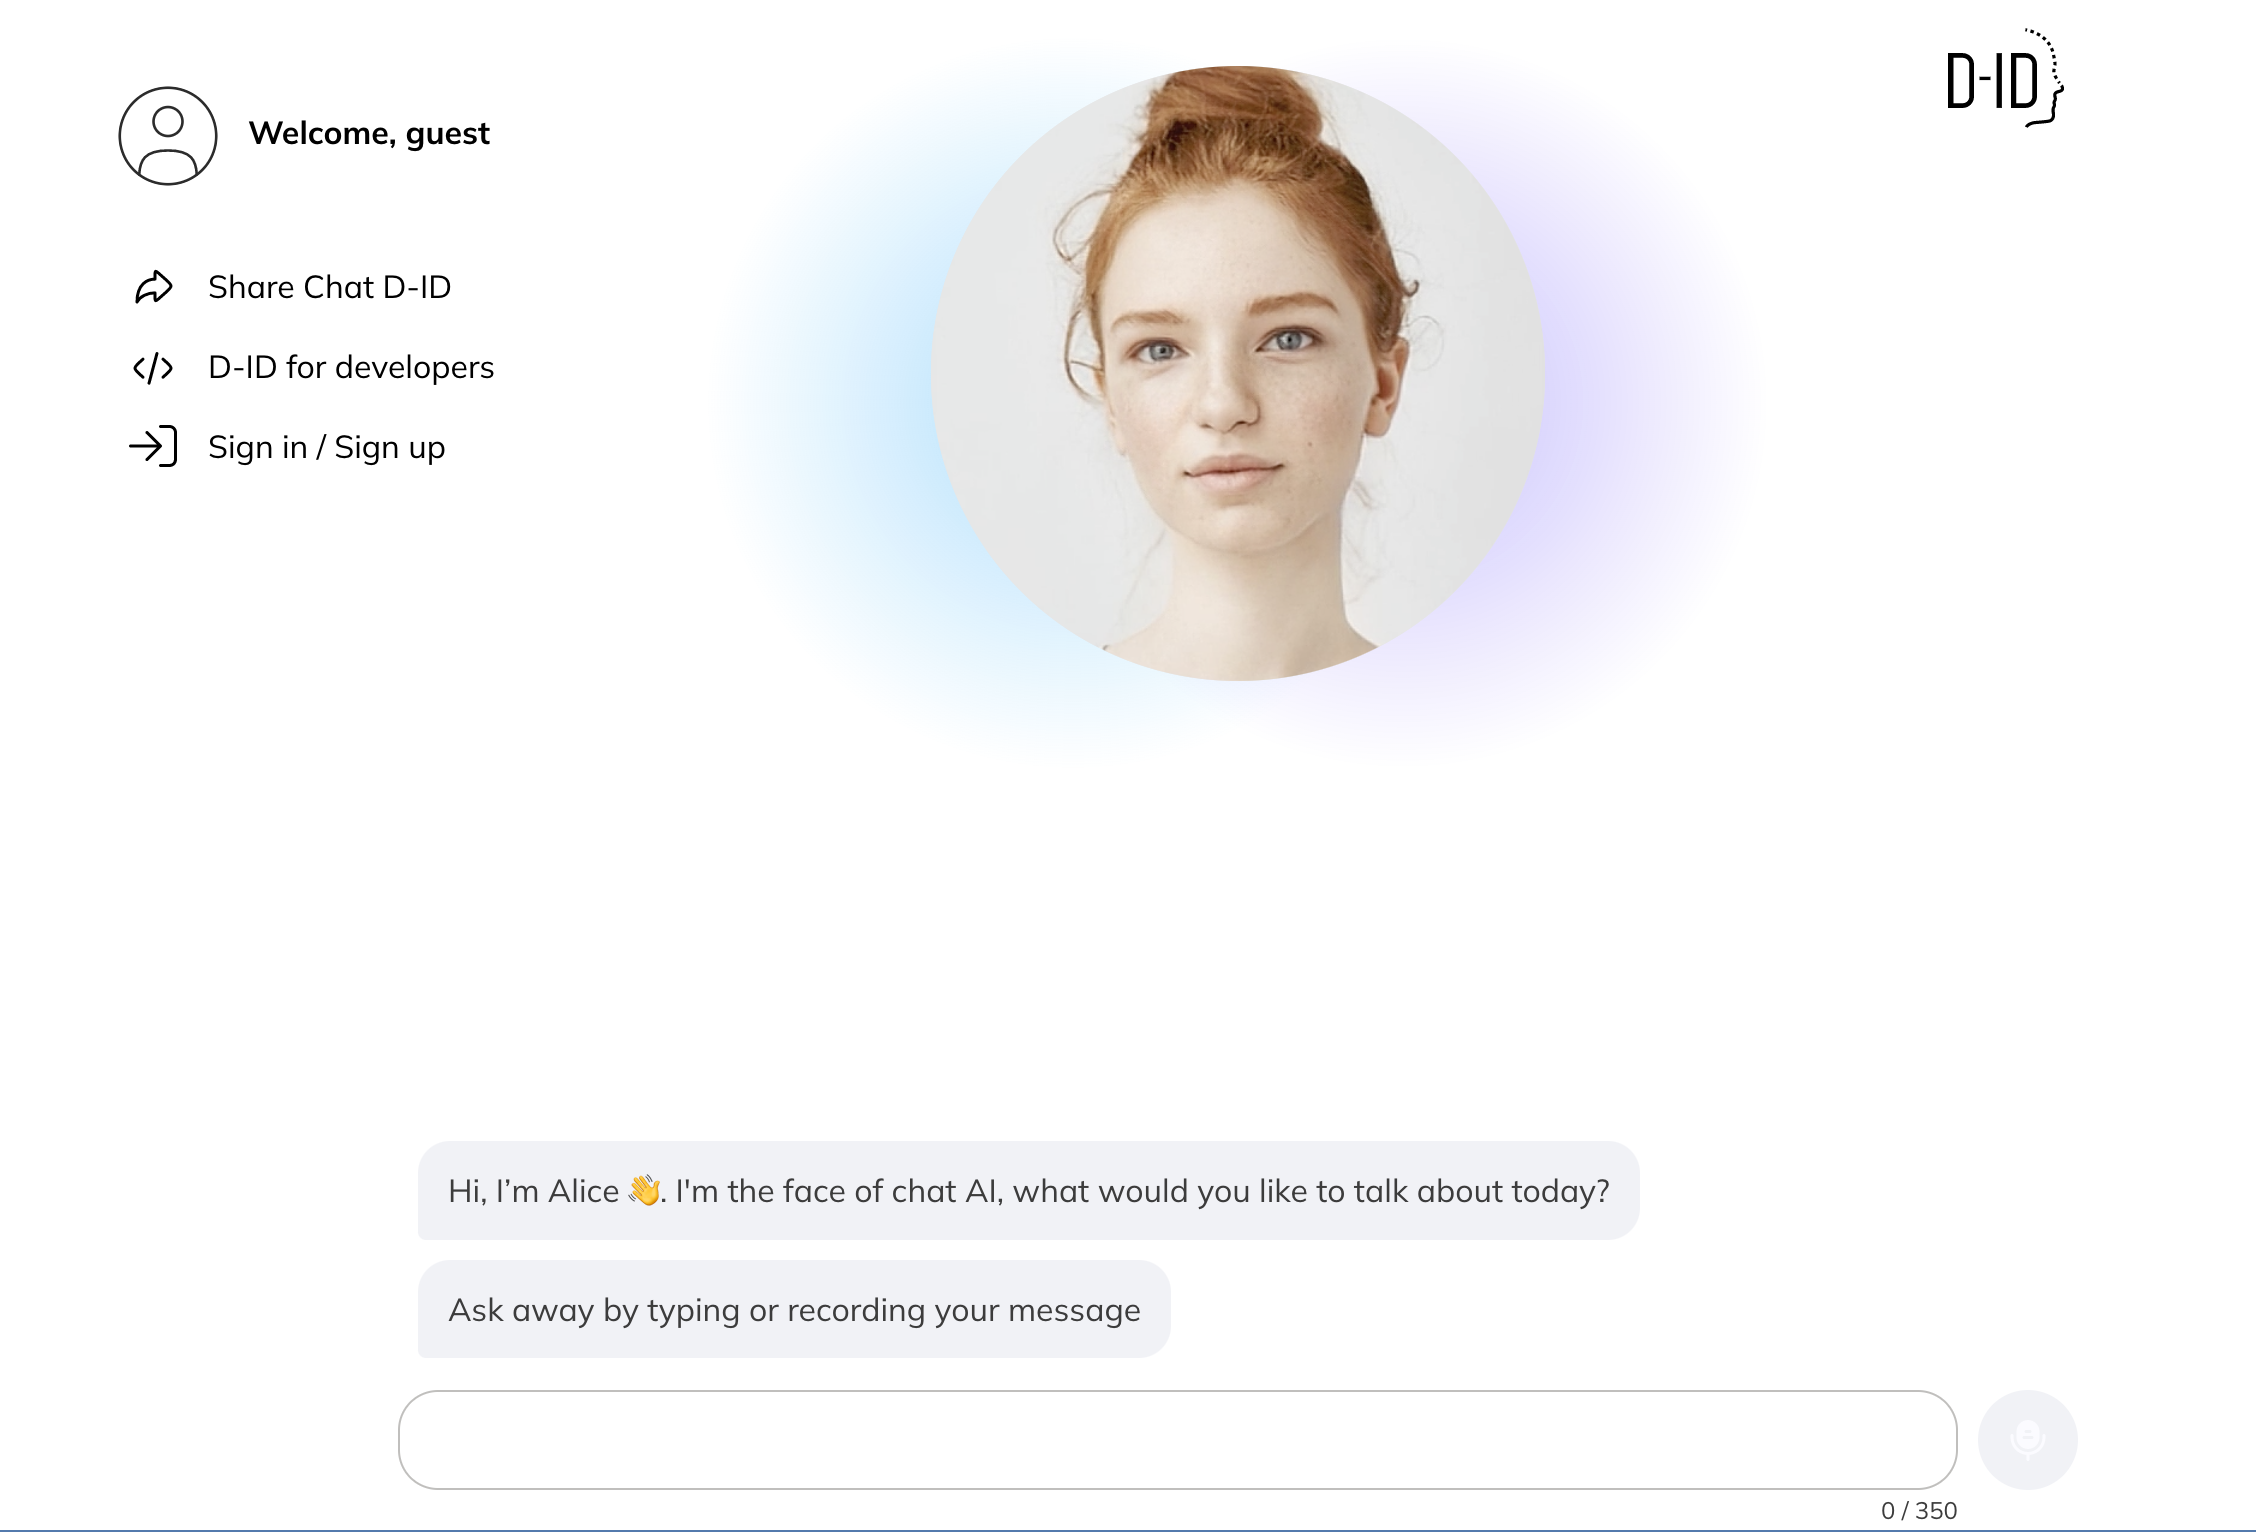 chat.D-ID enables anyone to talk face to face with AI